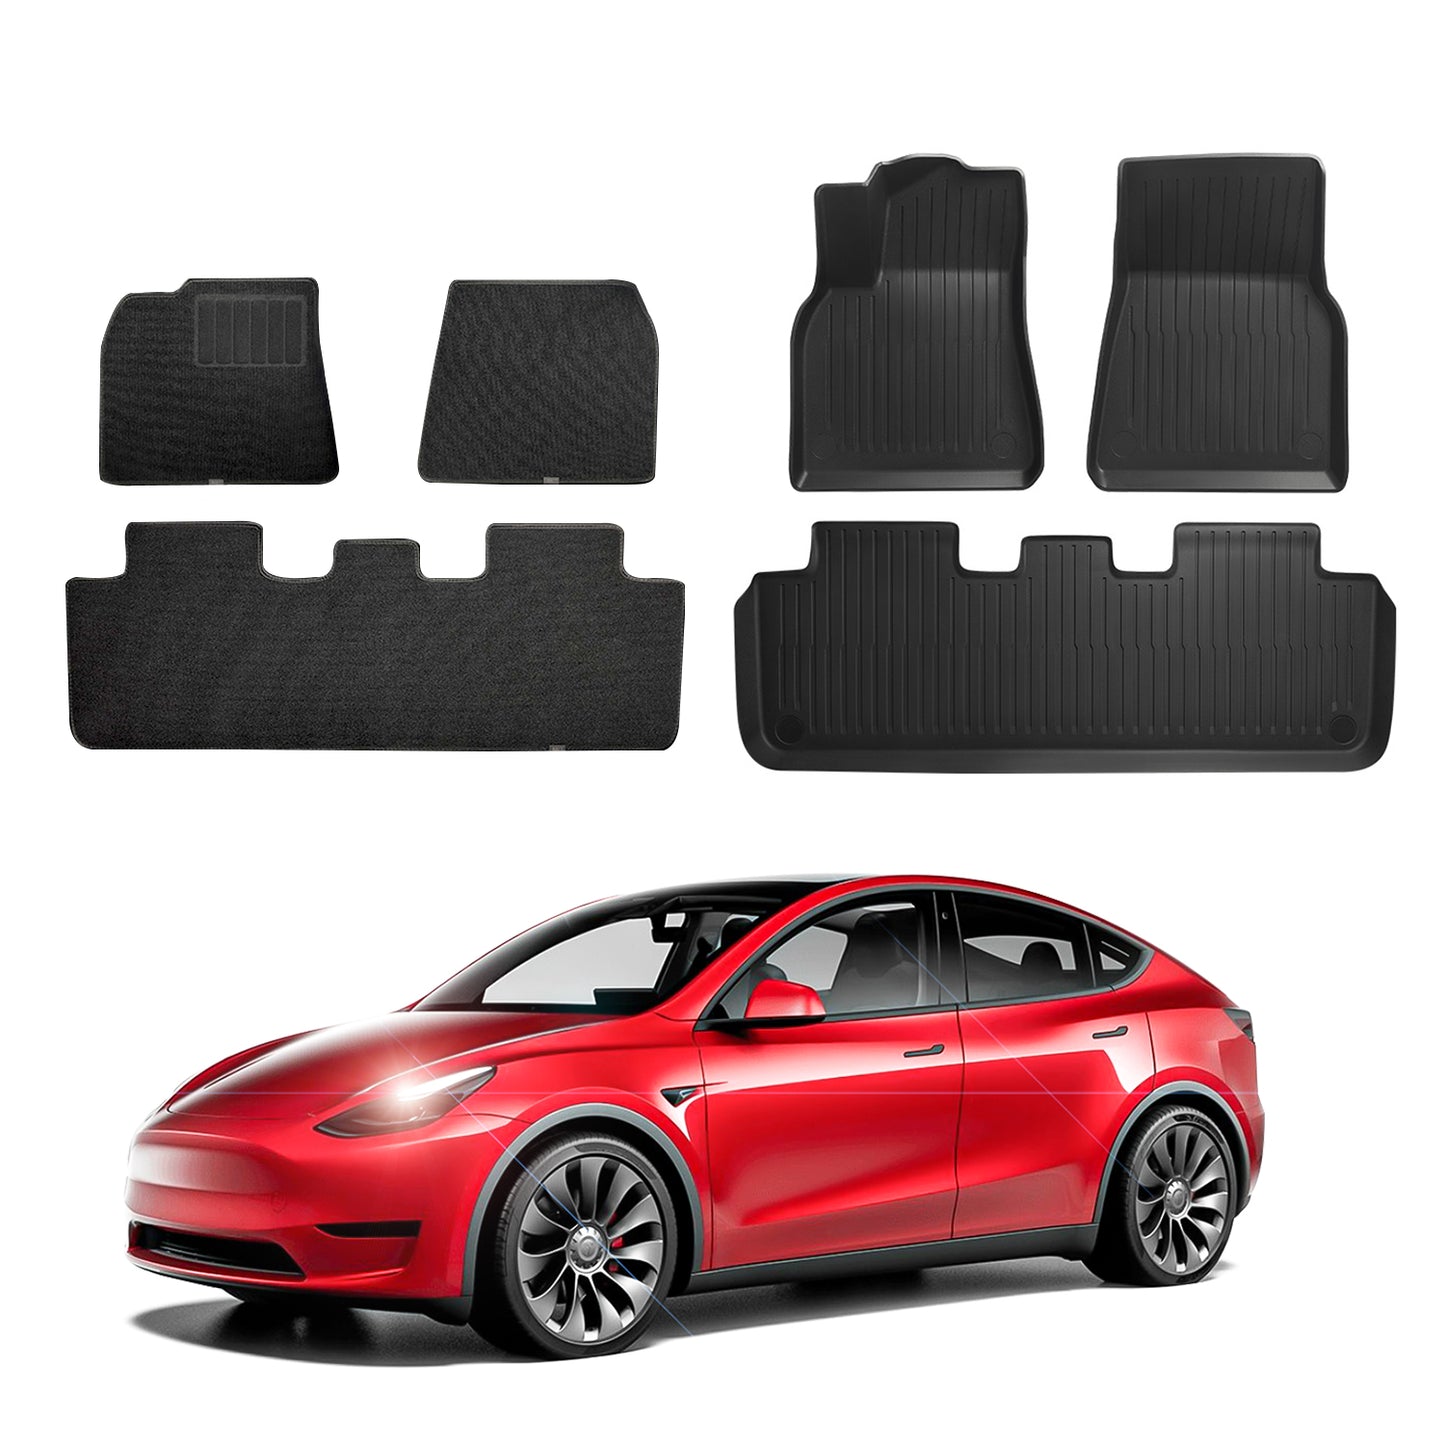 tesla model 3 floor mat mats TPE waterproof non slip all weather car 2022 2023 2021 2020 2019 2018 s3xy arcoche accessories accessory aftermarket price Vehicles standard long range performance sr+ electric car rwd ev interior exterior diy decoration price elon musk must have black white red blue 5 7 seats seat